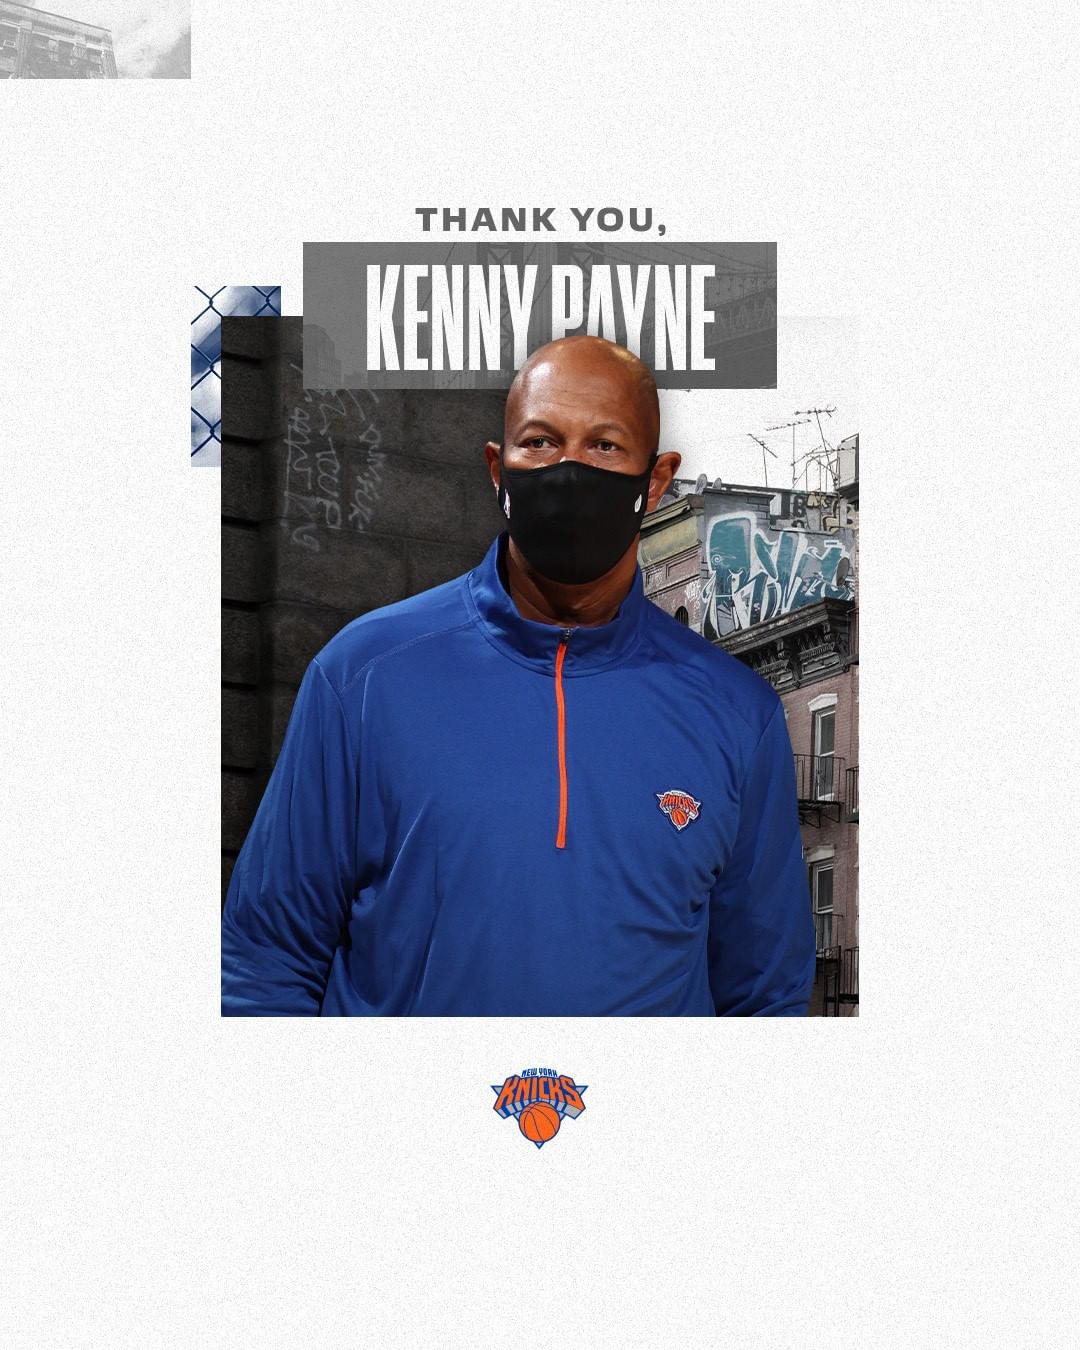 Thank you and good luck at @louisvillembb, Coach! #NewYorkForever...